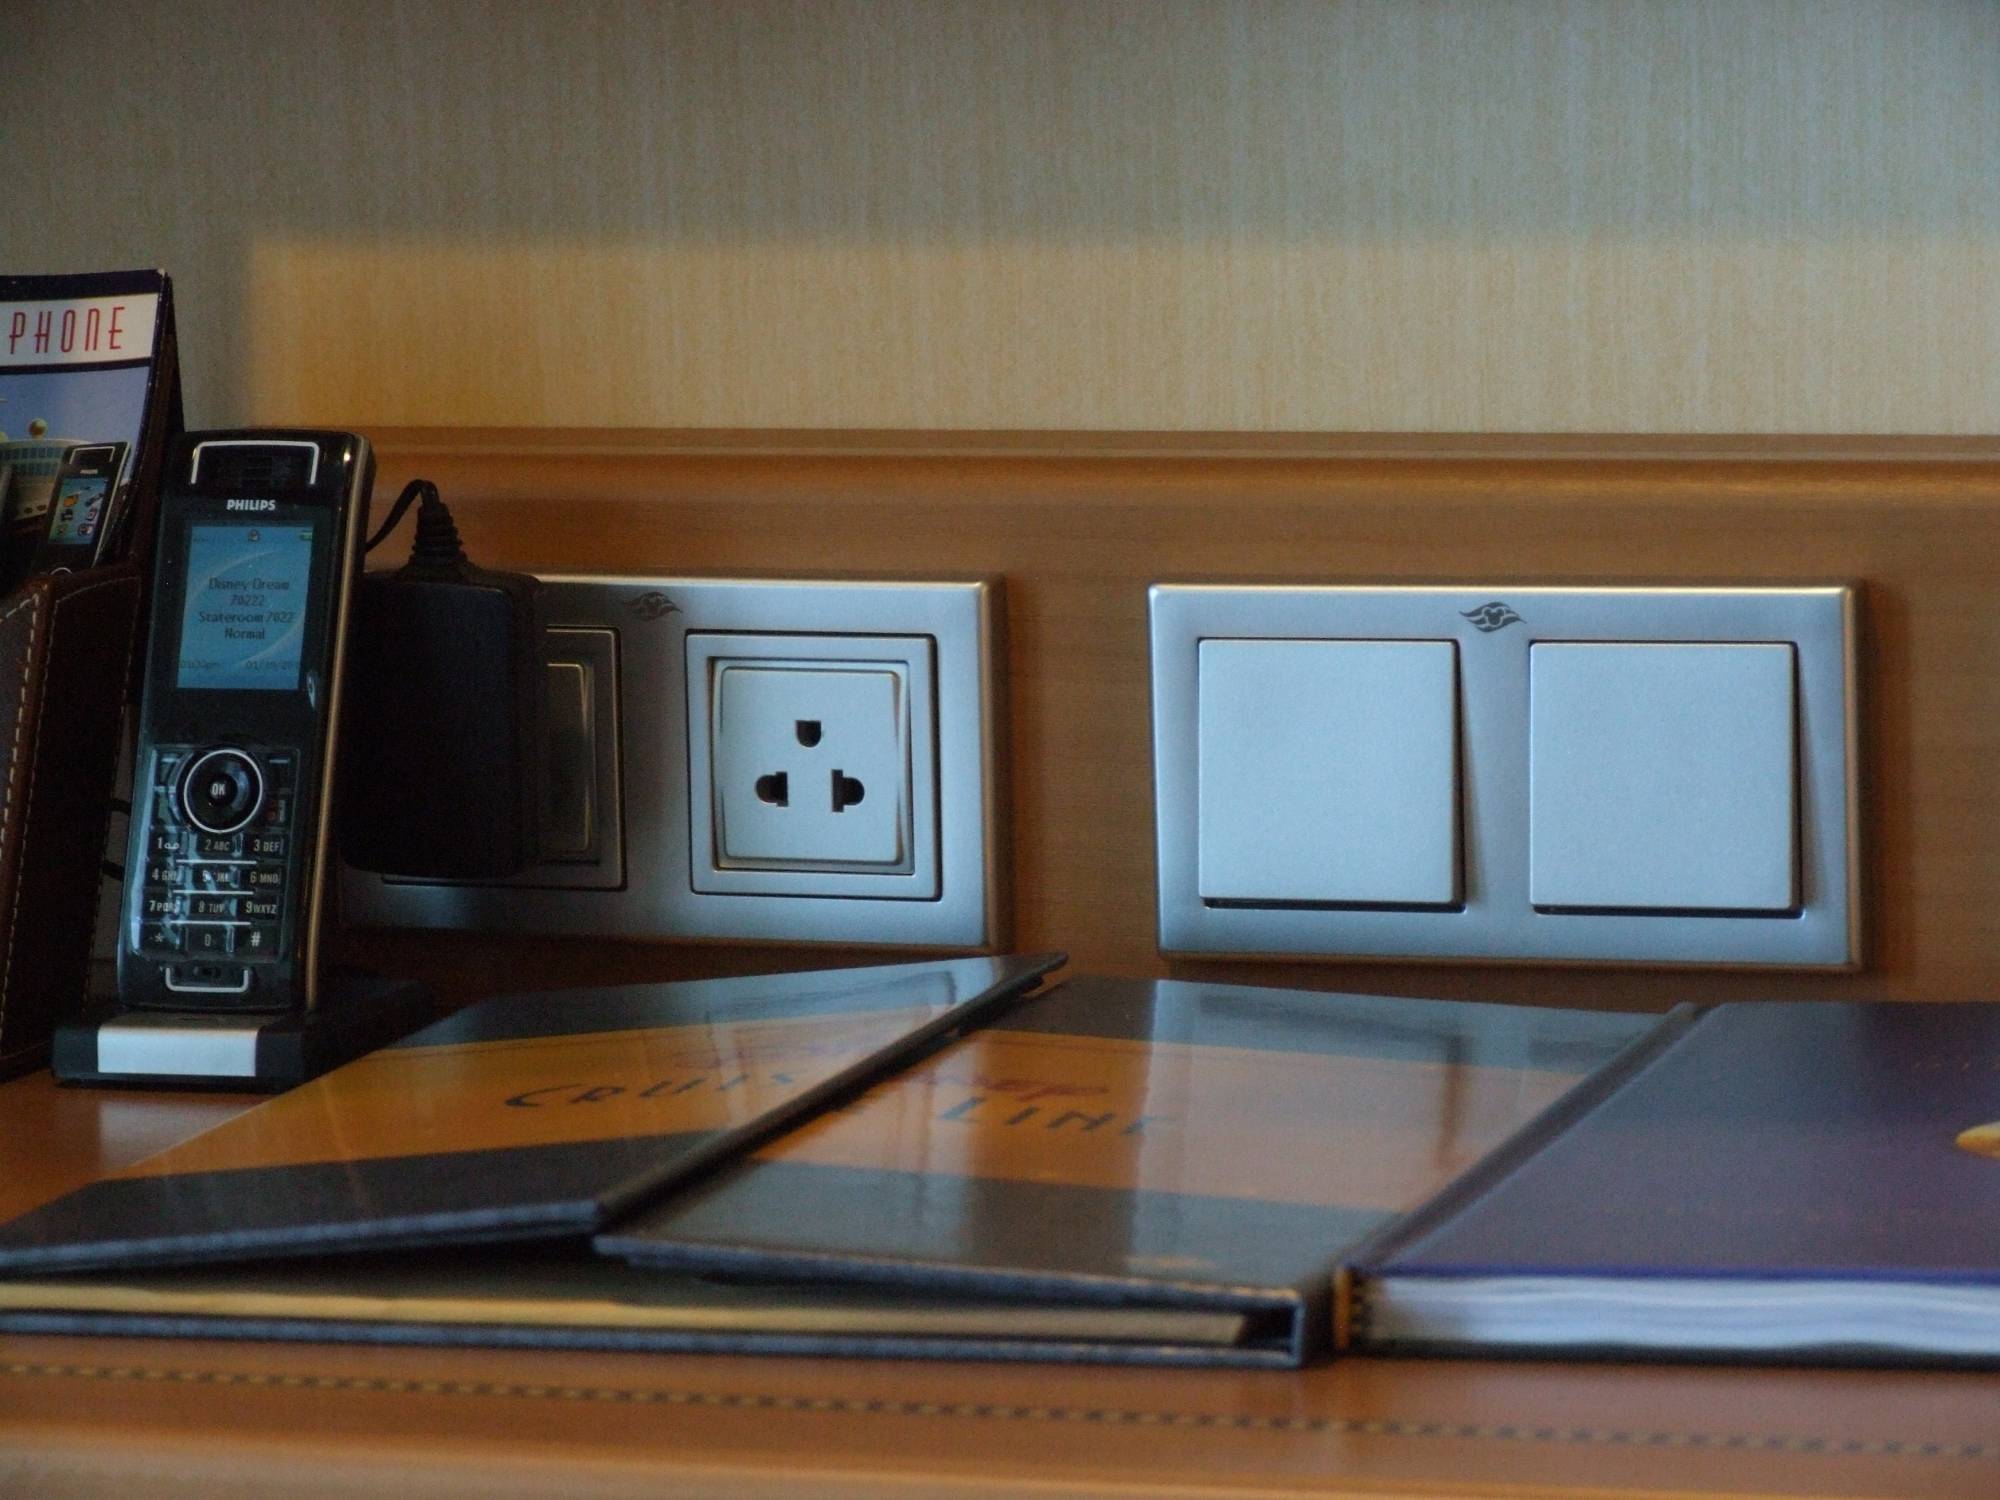 Learn how to keep your devices charged while onboard a Disney Cruise |PassPorter.com